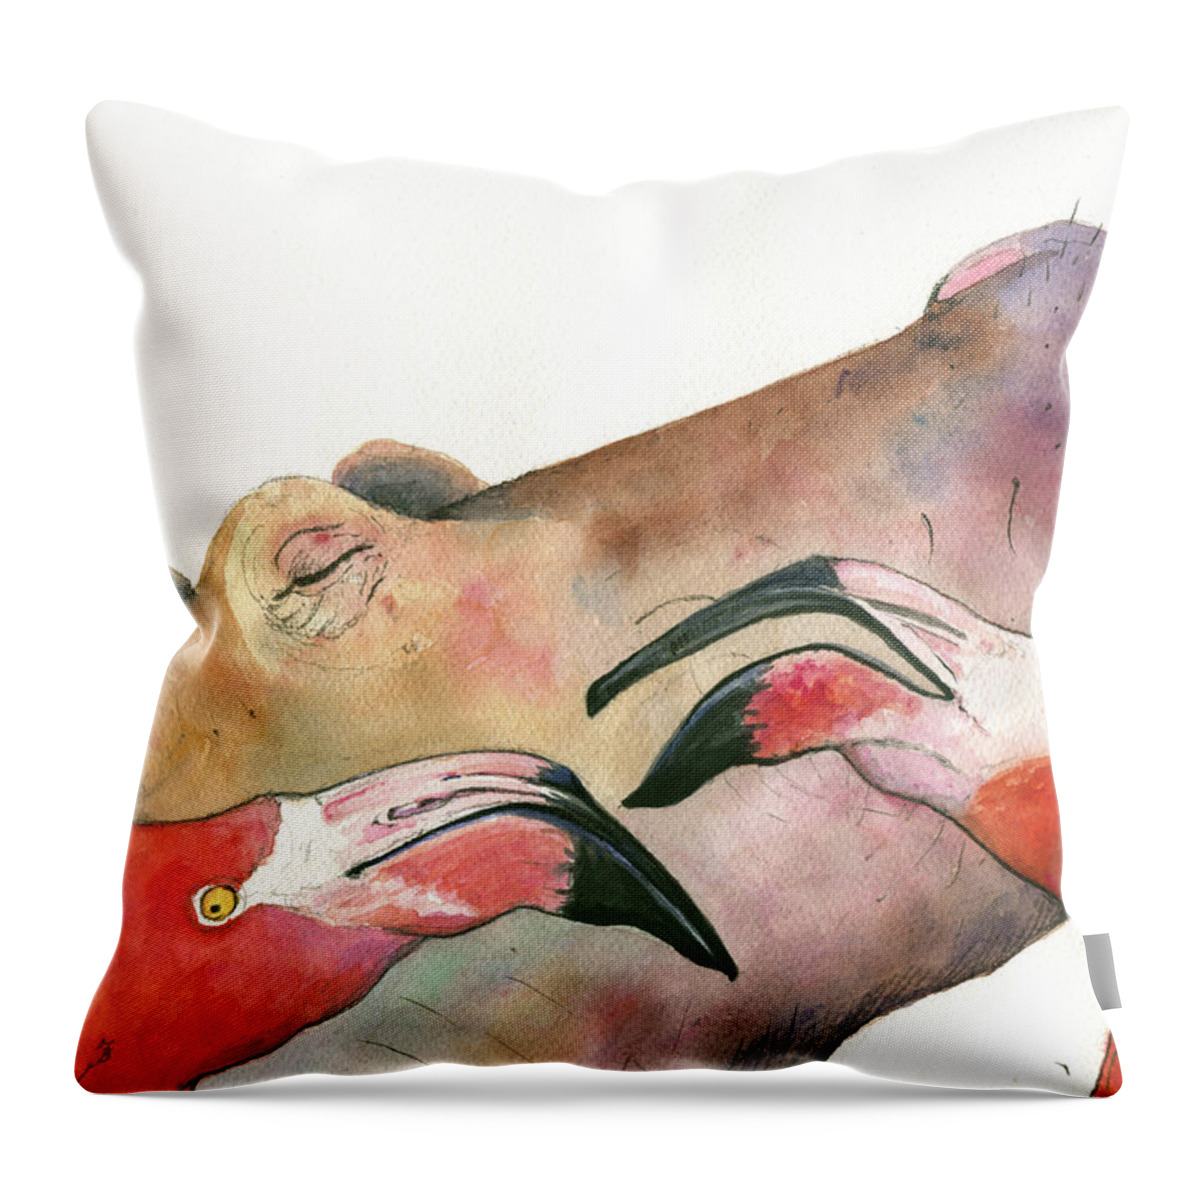 Hippo Art Throw Pillow featuring the painting Hippo With Flamingos Heads by Juan Bosco